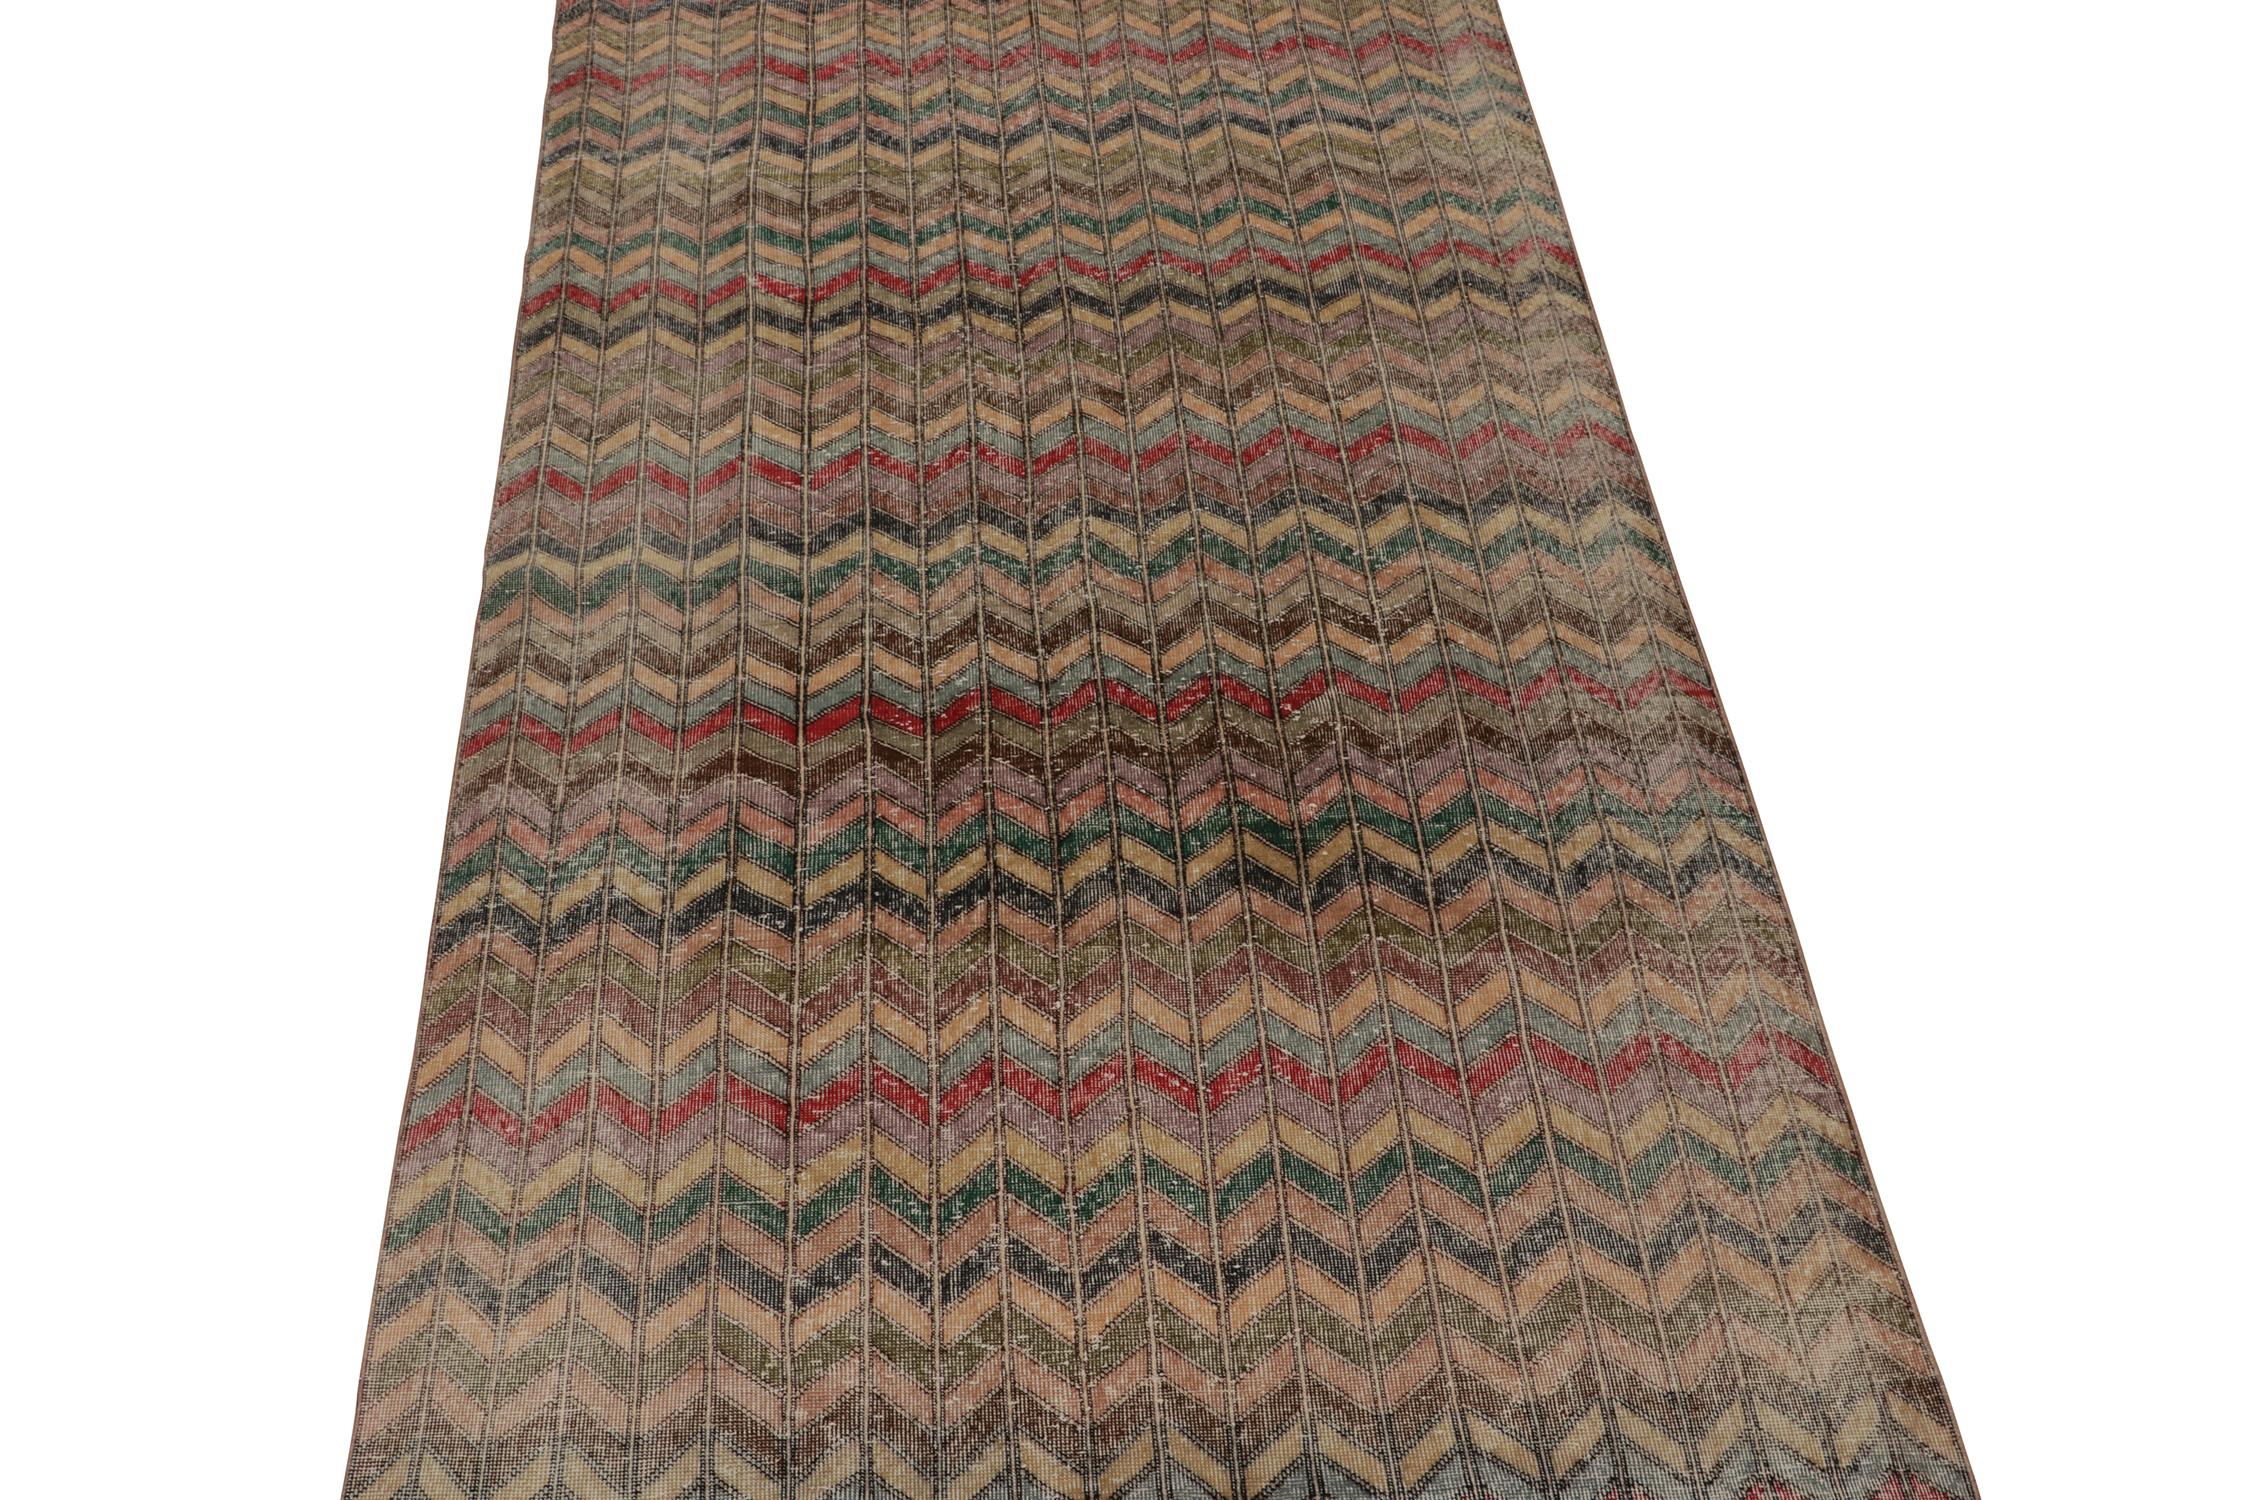 This vintage 6x11 rug is a new addition to Rug & Kilim’s commemorative Mid-Century Pasha Collection. This line is a commemoration of rare curations we believe to hail from mid-century Turkish designer Zeki Müren.
Further on the Design:
This